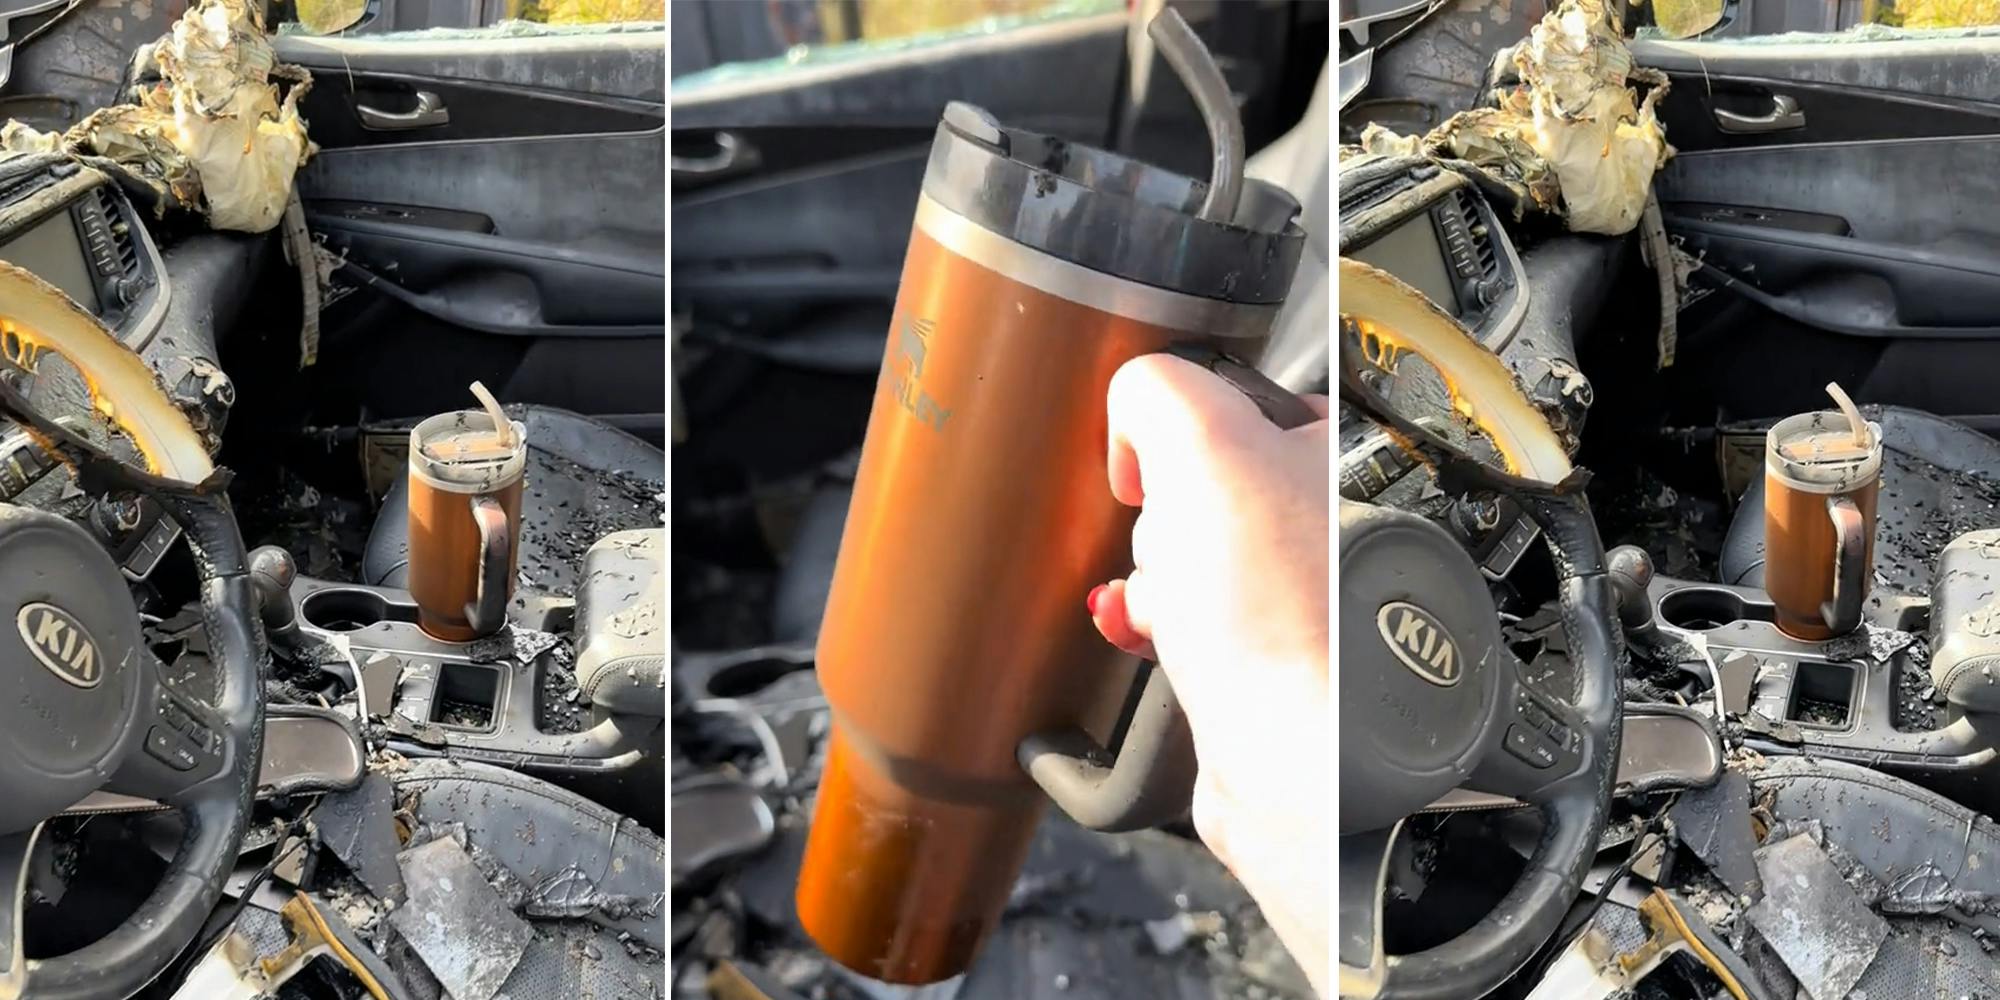 Woman Goes Viral After Stanley Cup Survived Car Fire, Company Offers to  Replace Vehicle